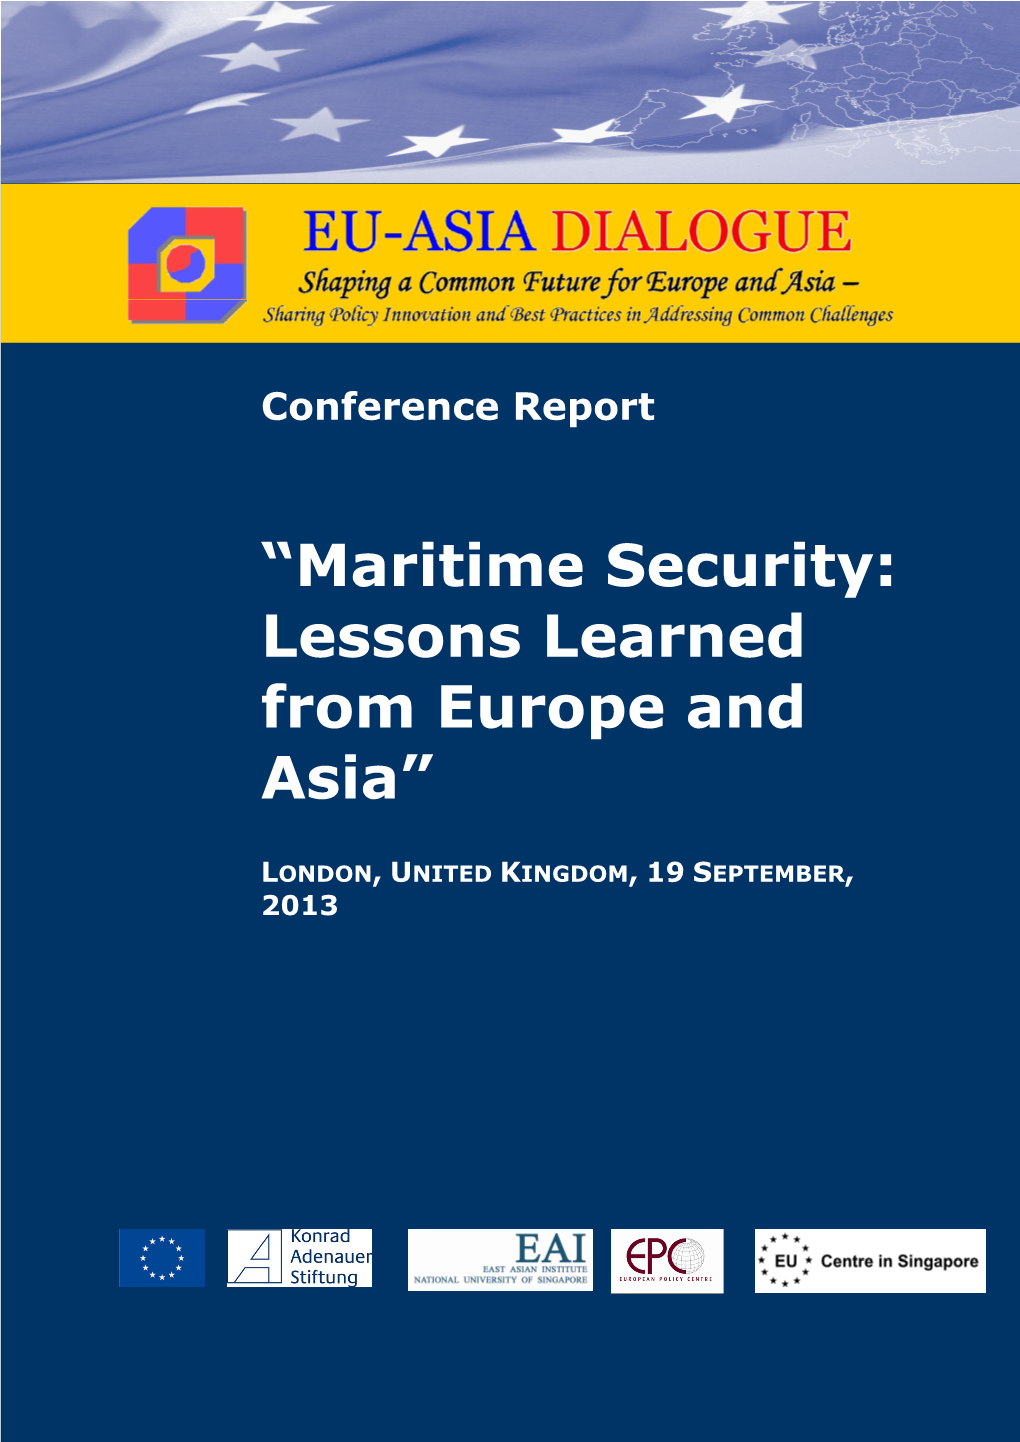 “Maritime Security: Lessons Learned from Europe and Asia”